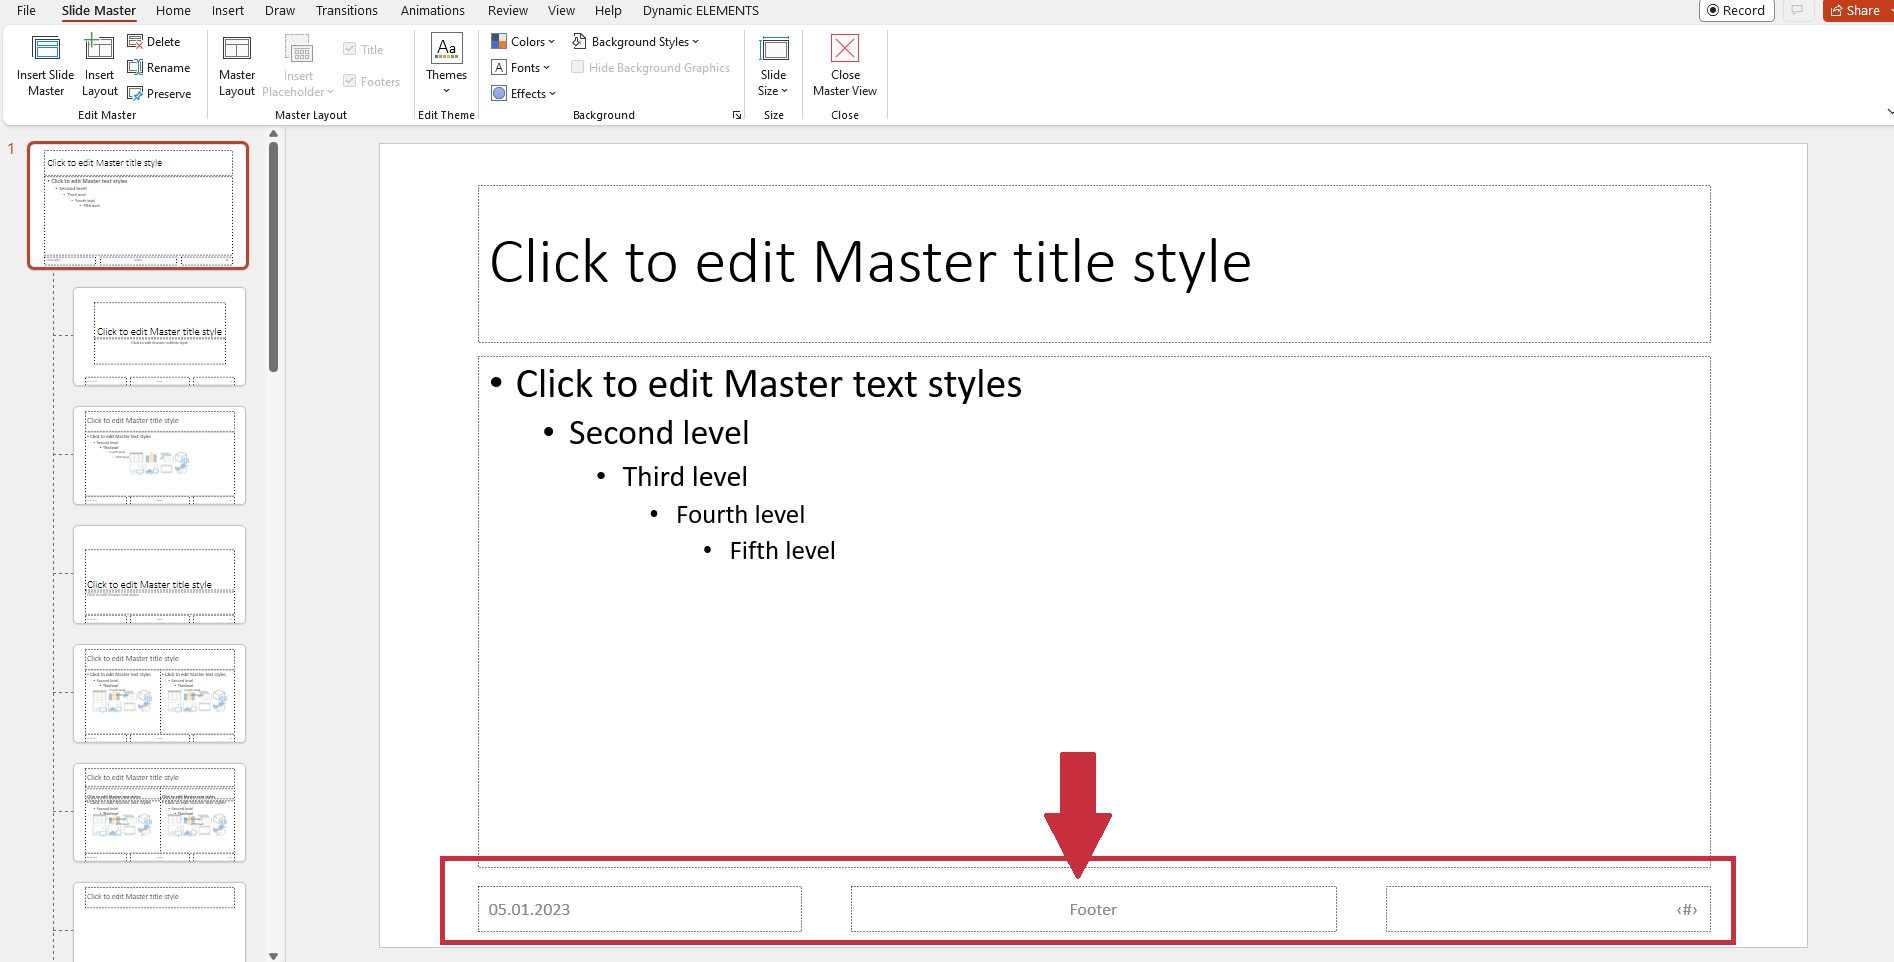 PowerPoint Slide Master use the footer for adding information